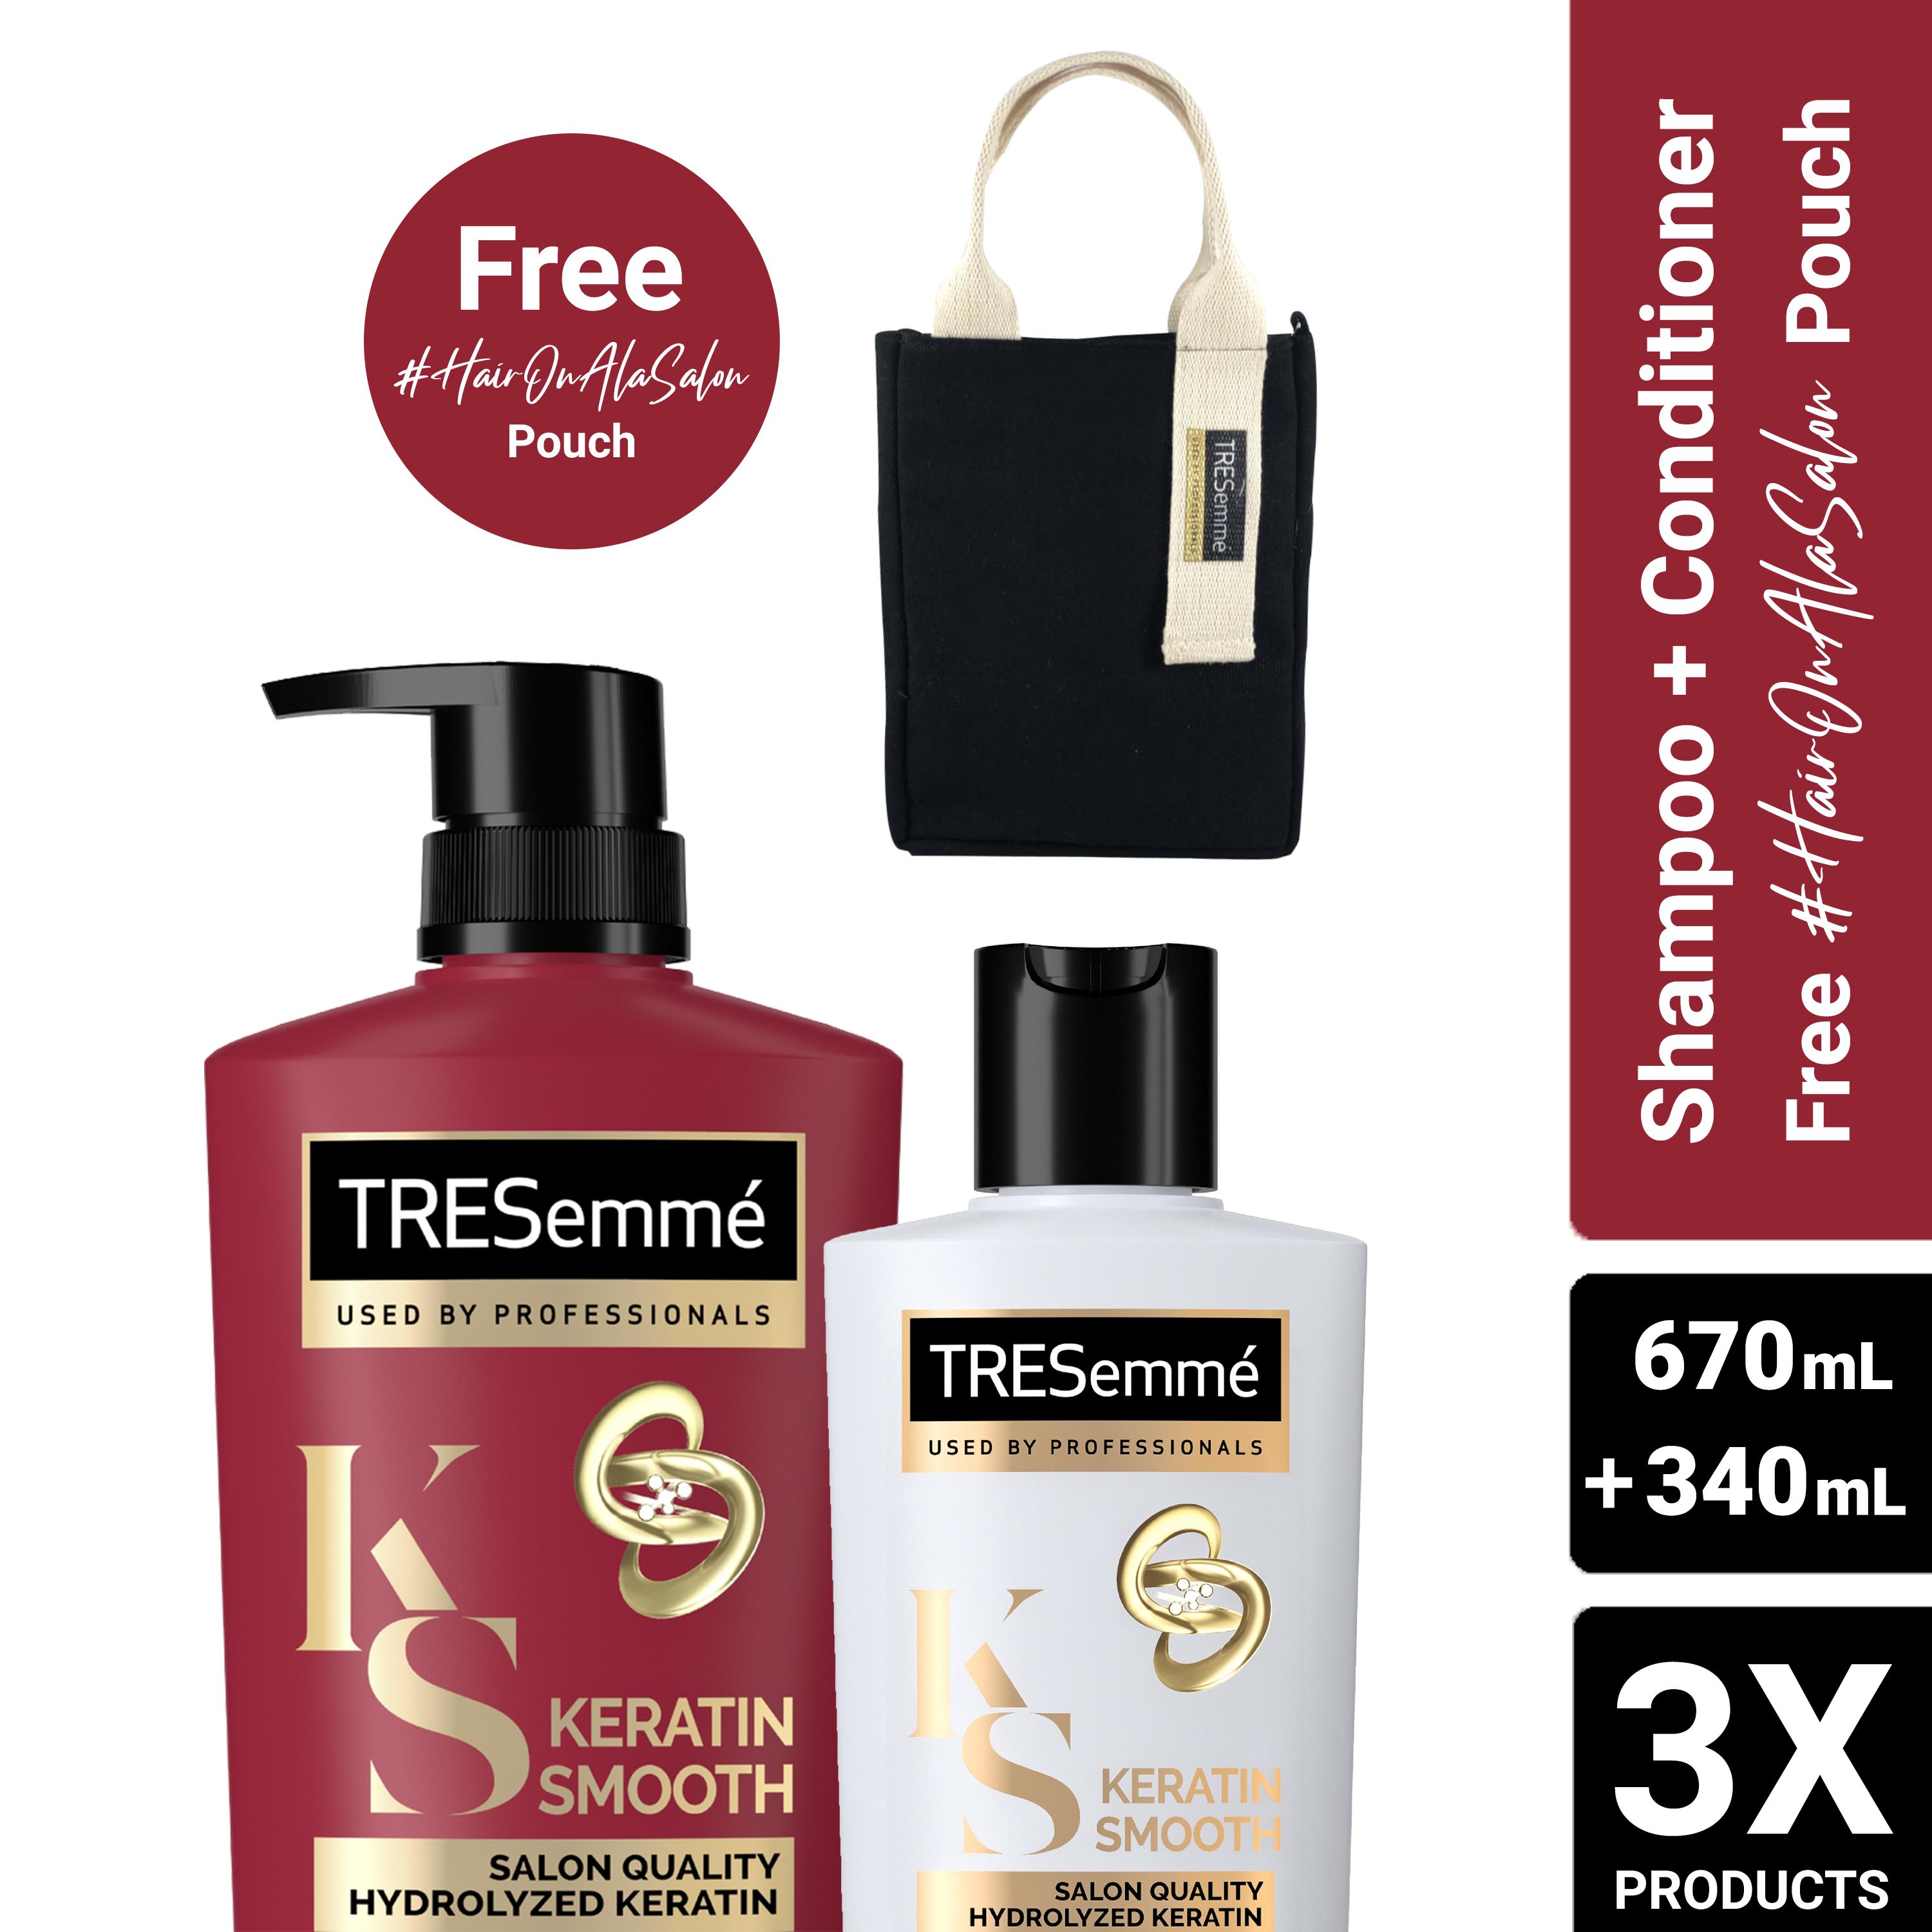 BUY TRESEMME KERATIN SMOOTH SHAMPOO 670ML + TRESEMME SMOOTH CONDITIONER 340ML FREE TRESEMME POUCH-0